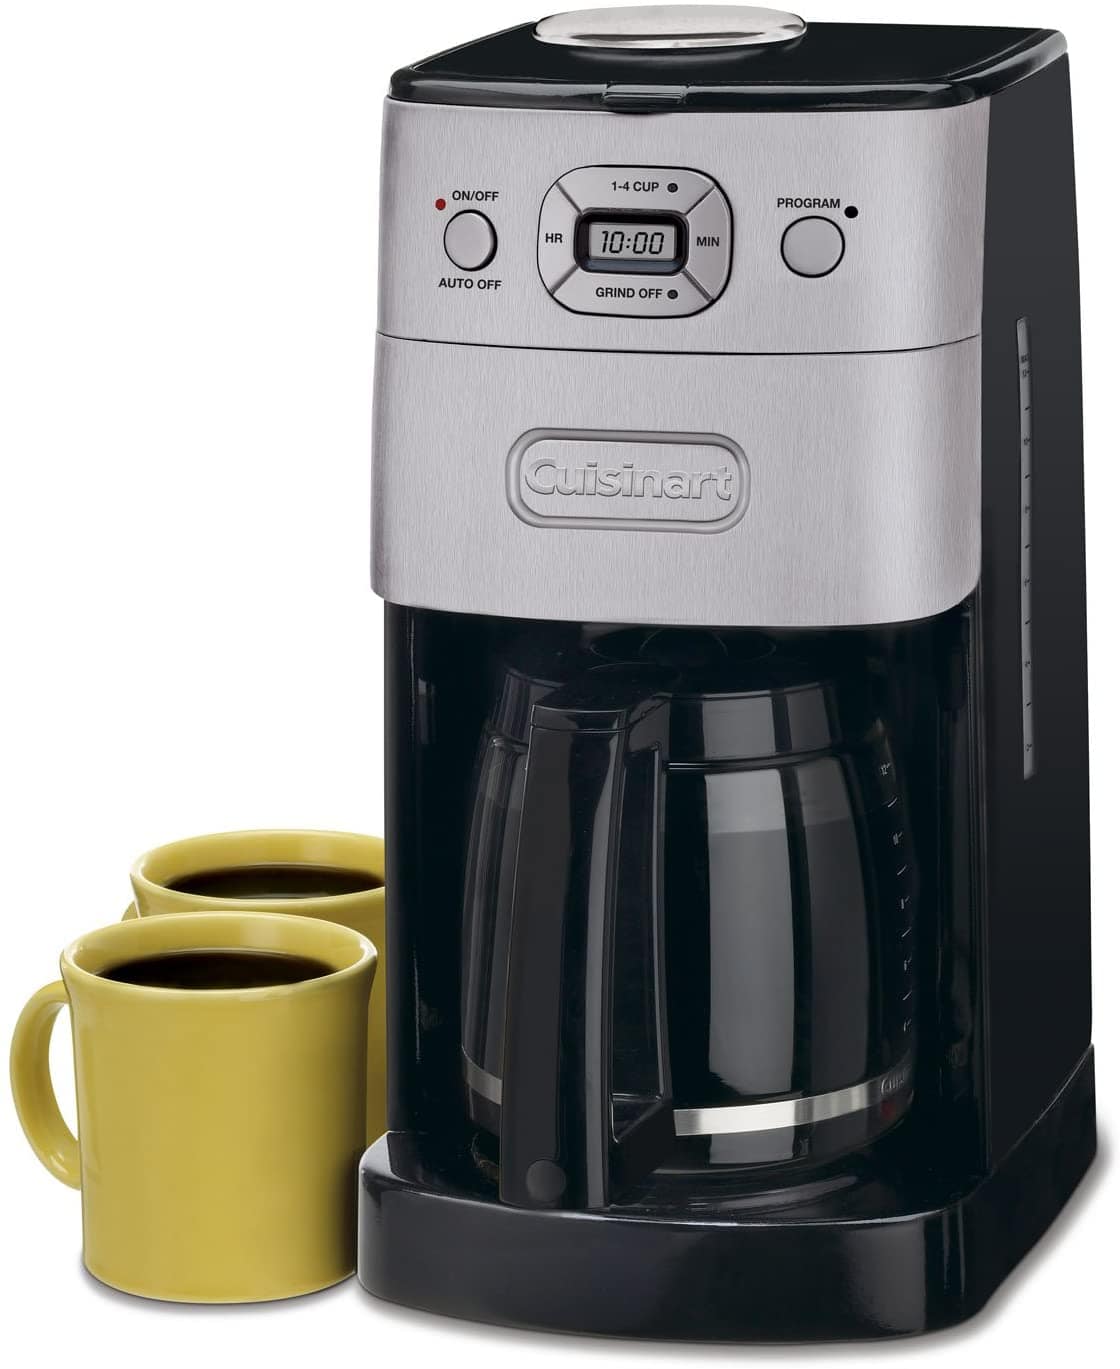 Cuisinart DGB-625BC Grind and Brew